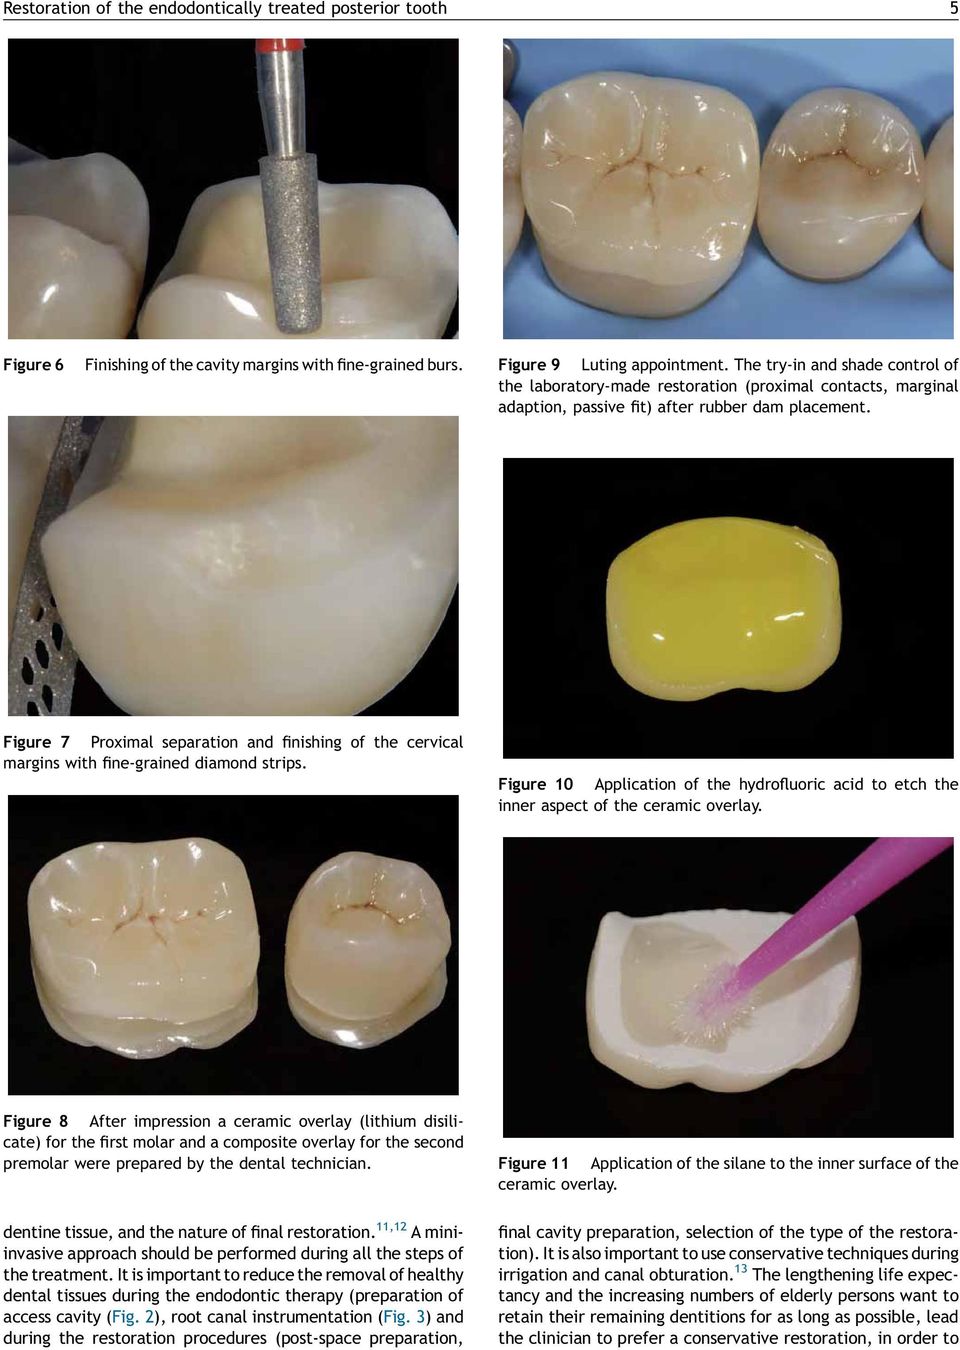 Figure 7 Proximal separation and finishing of the cervical margins with fine-grained diamond strips. Figure 10 Application of the hydrofluoric acid to etch the inner aspect of the ceramic overlay.